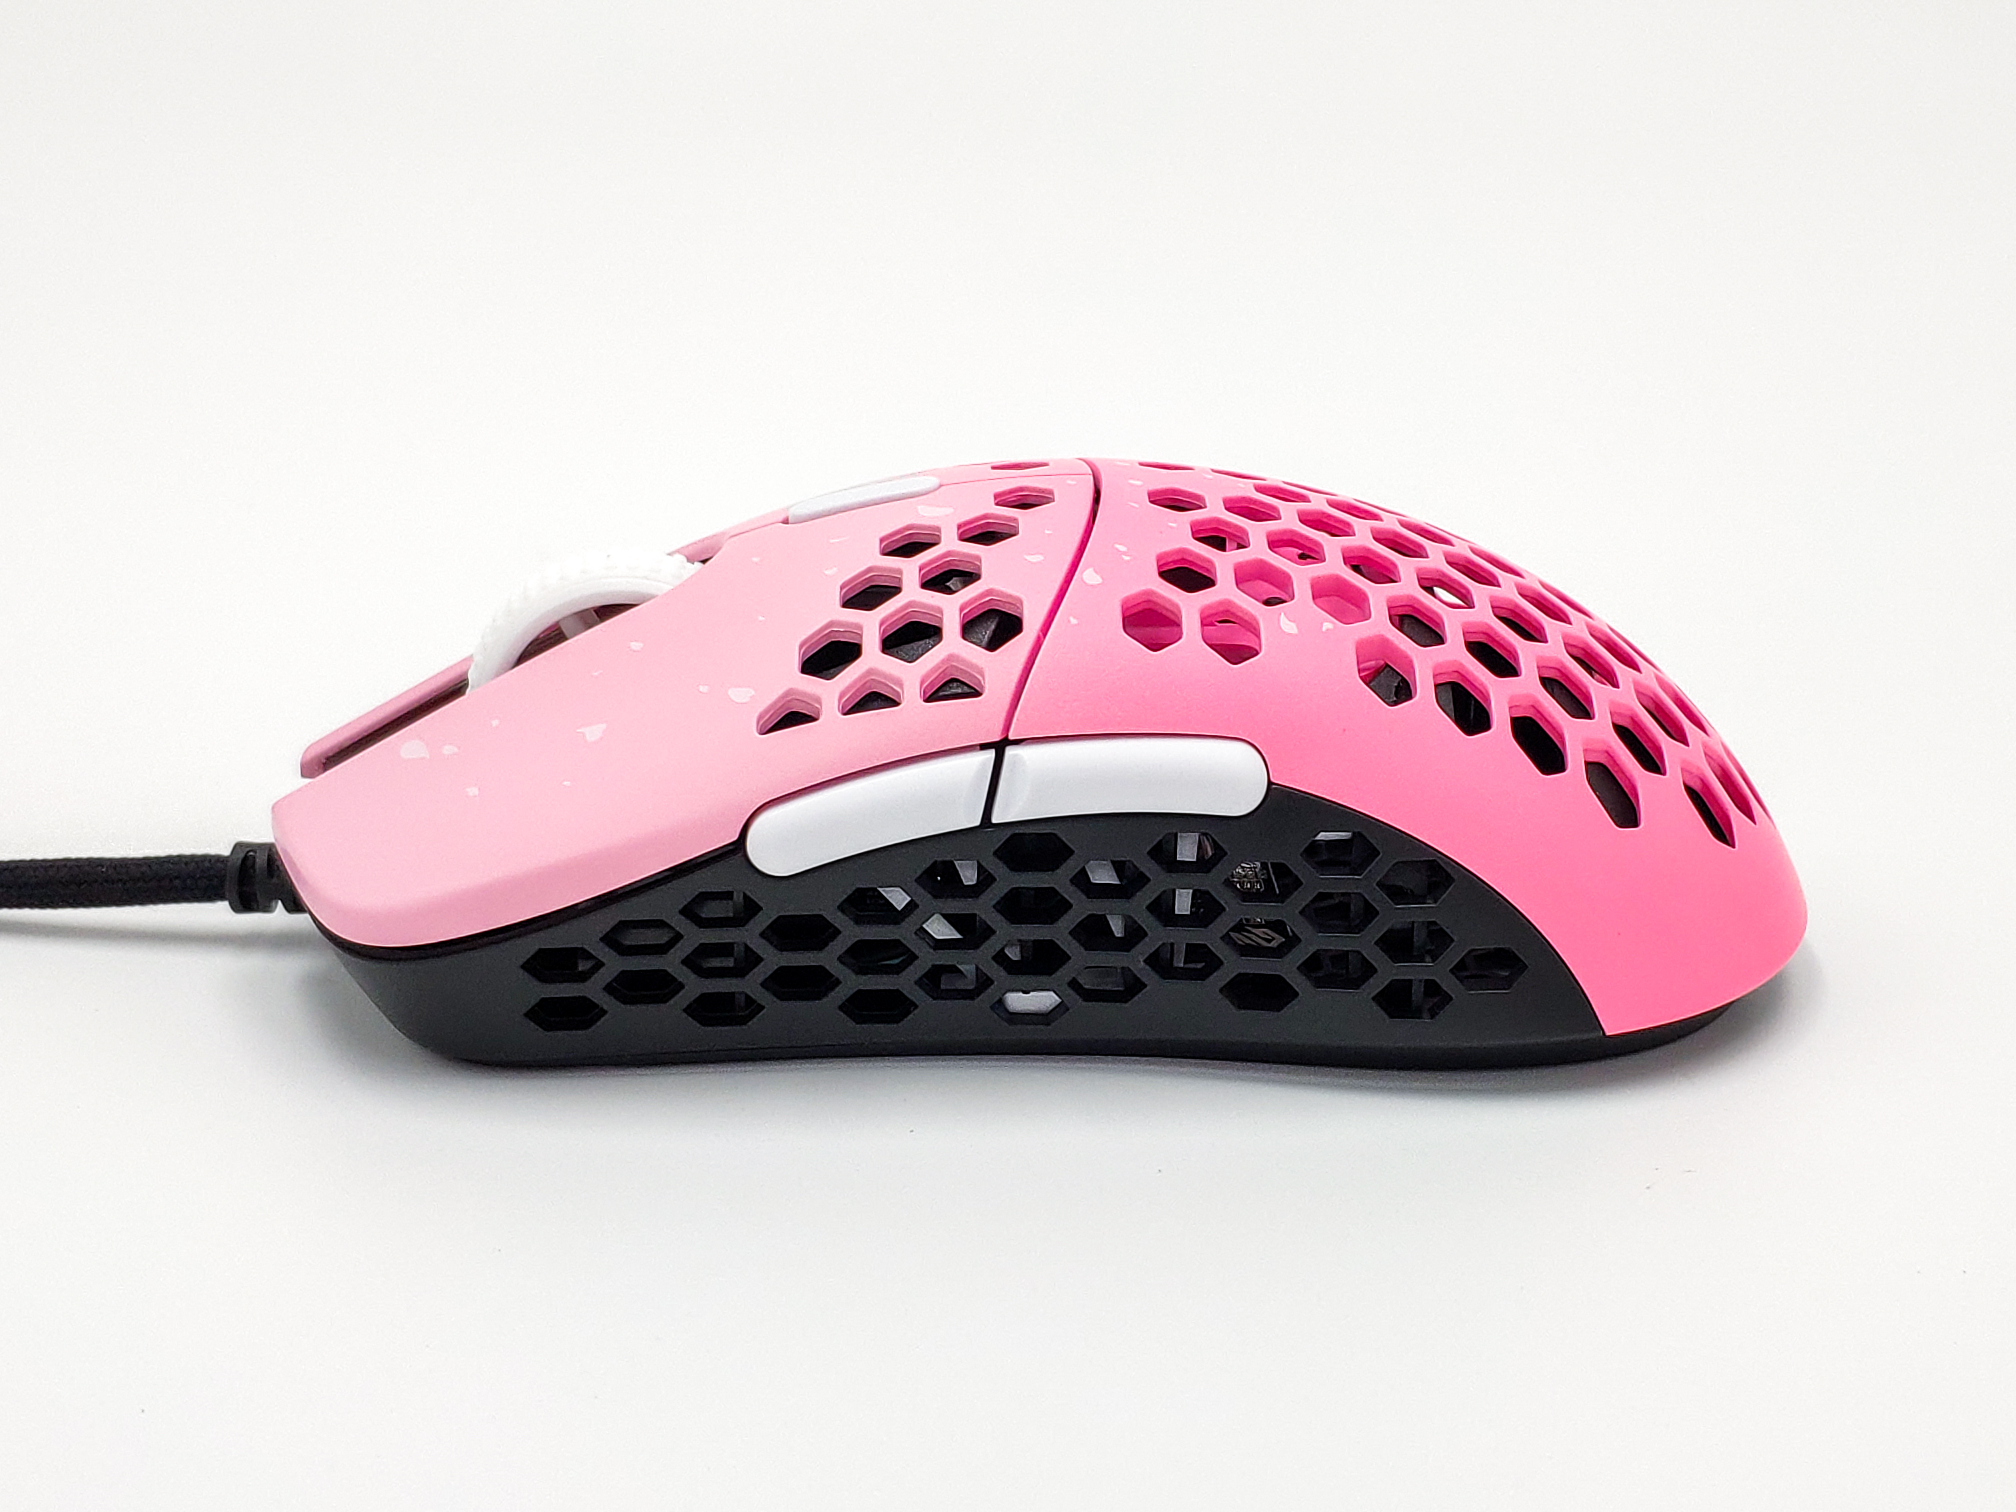 Pink 3360 Performance Sensor G-Wolves Hati S HTS Sakura Limited Edition 49g Ultra Lightweight Honeycomb Design Wired Gaming Mouse up to 16000 DPI 